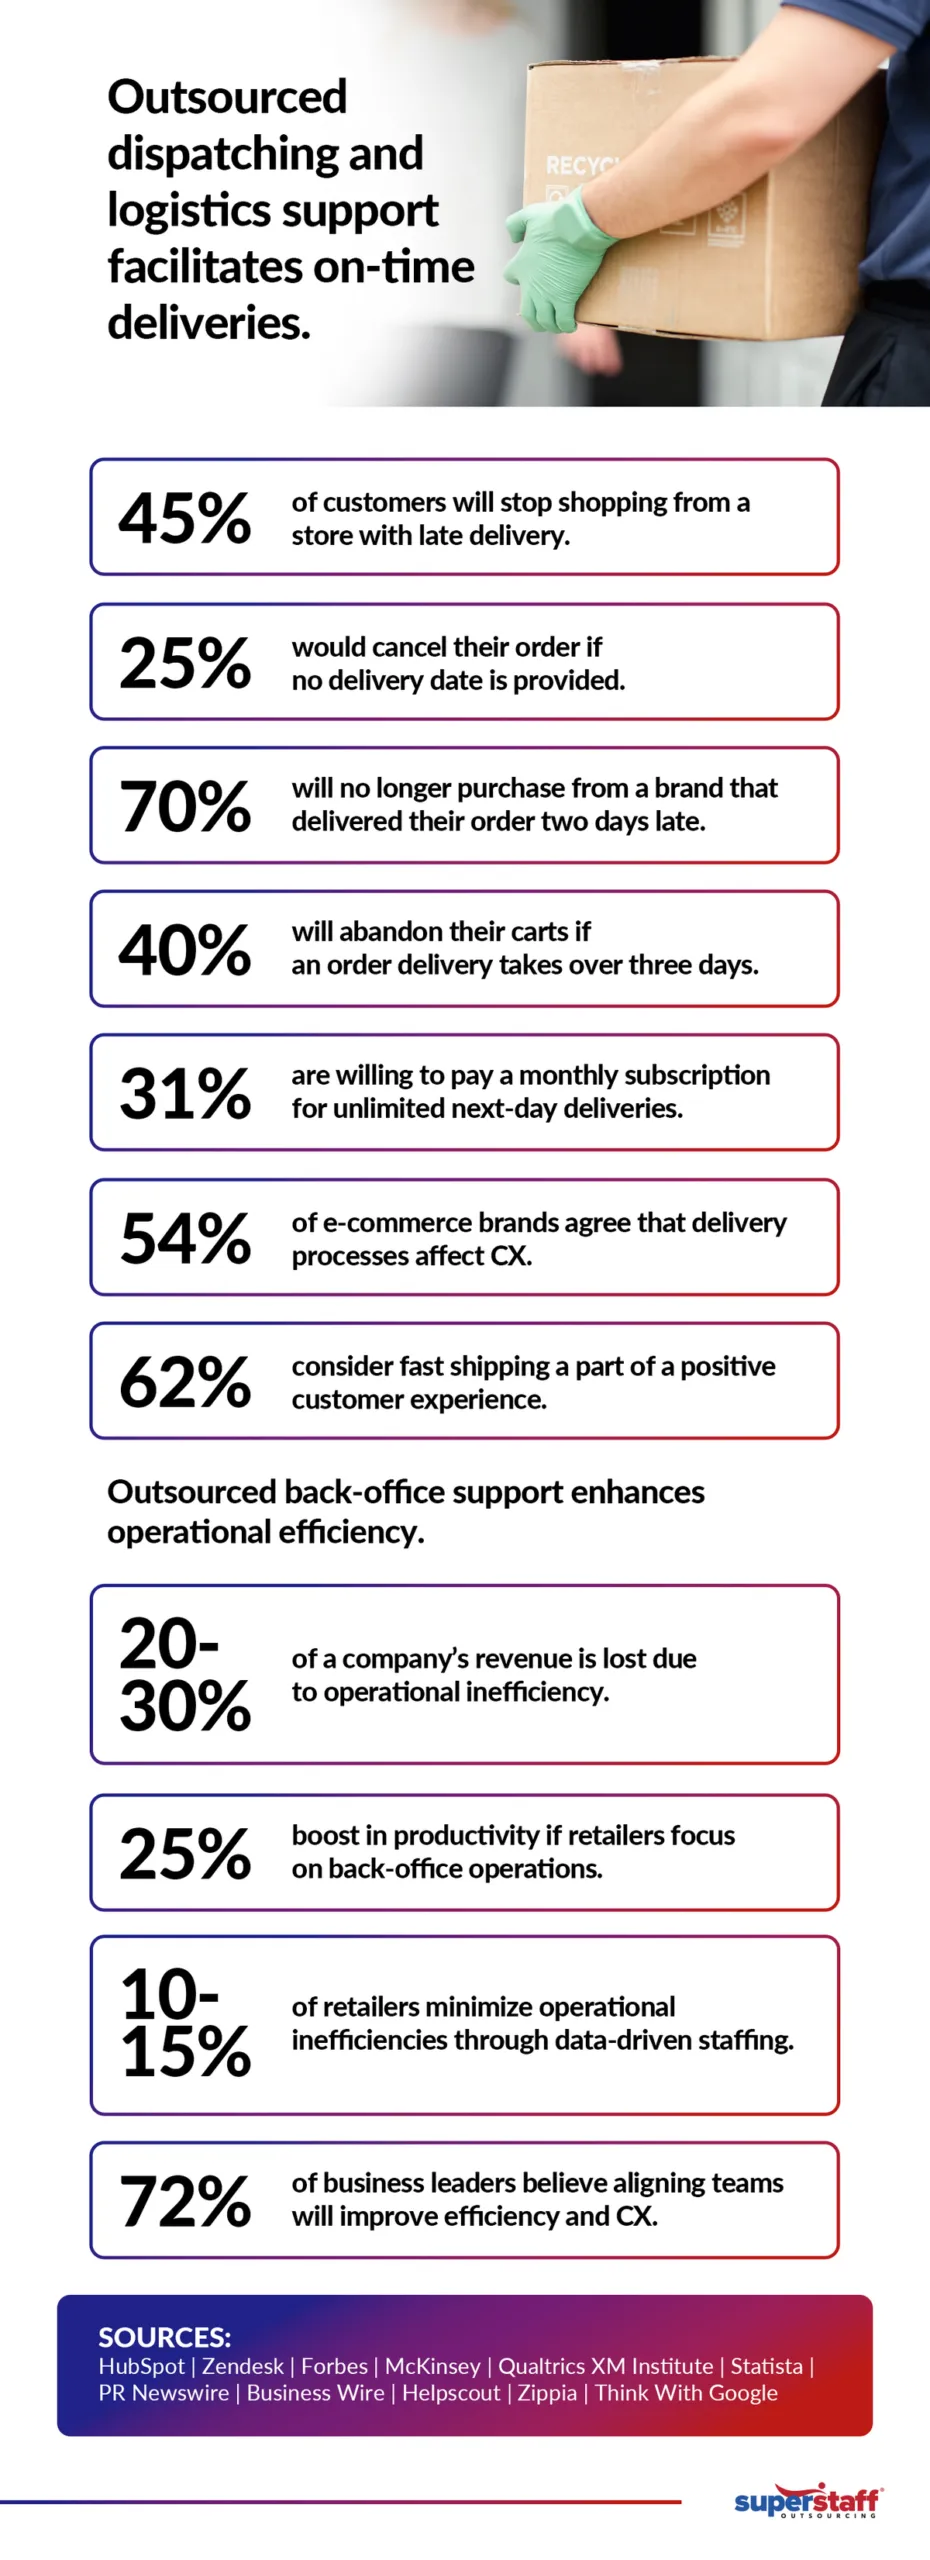 An infographic discussing how outsourced dispatching and logistics support facilitates on-time deliveries to help you avoid a poor customer experience.